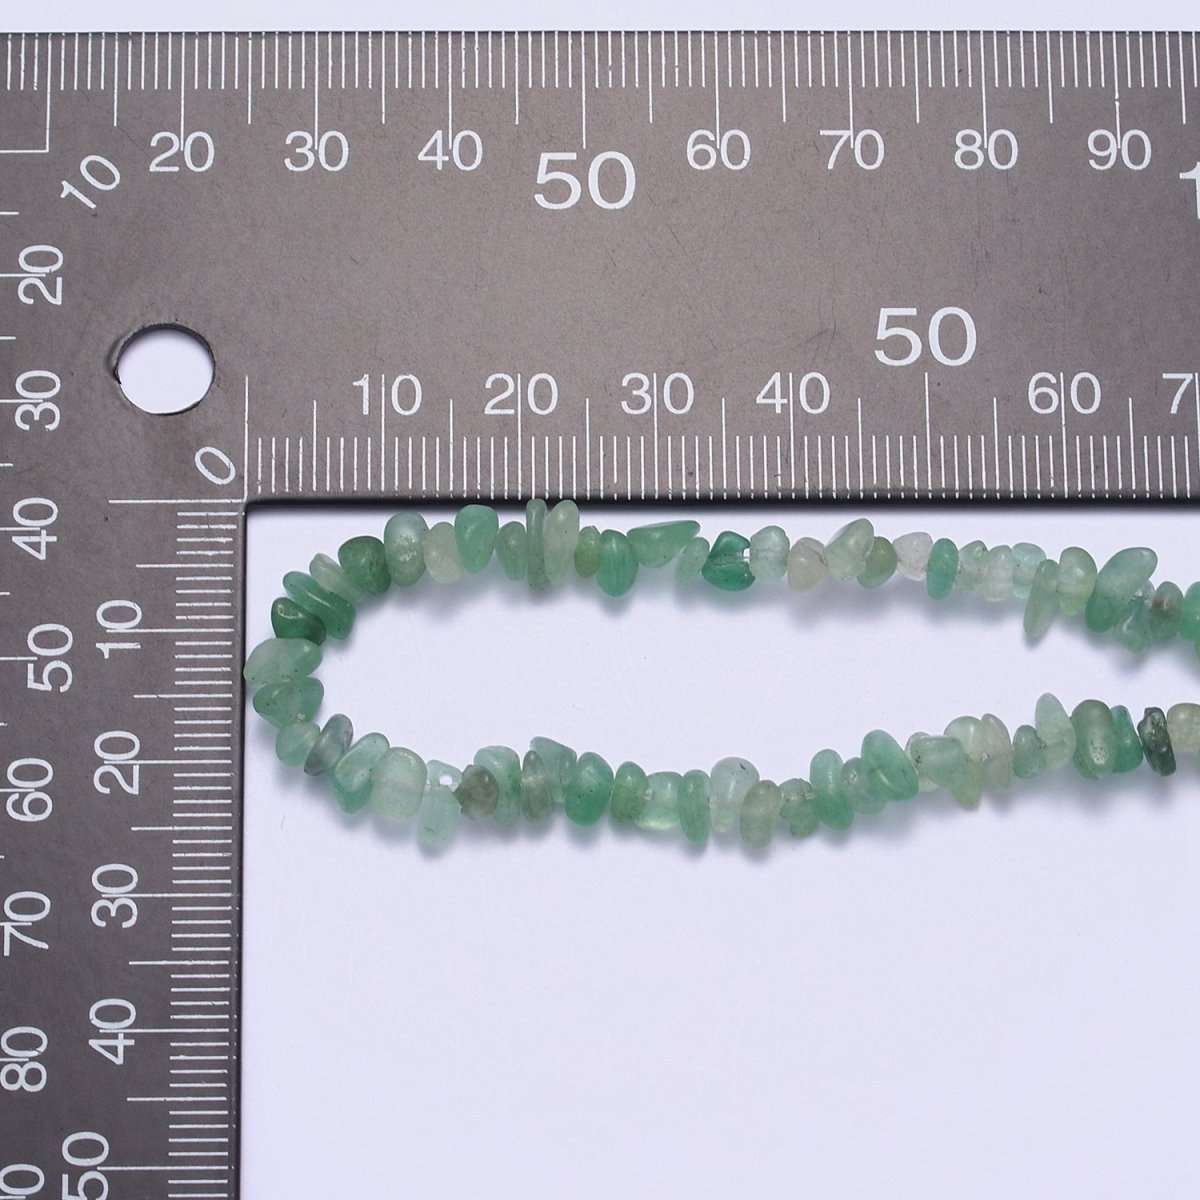 17.5 Inch Natural Green Aventurine Crystal Stone Bead Necklace with 2" Extender | WA-643 Clearance Pricing - DLUXCA